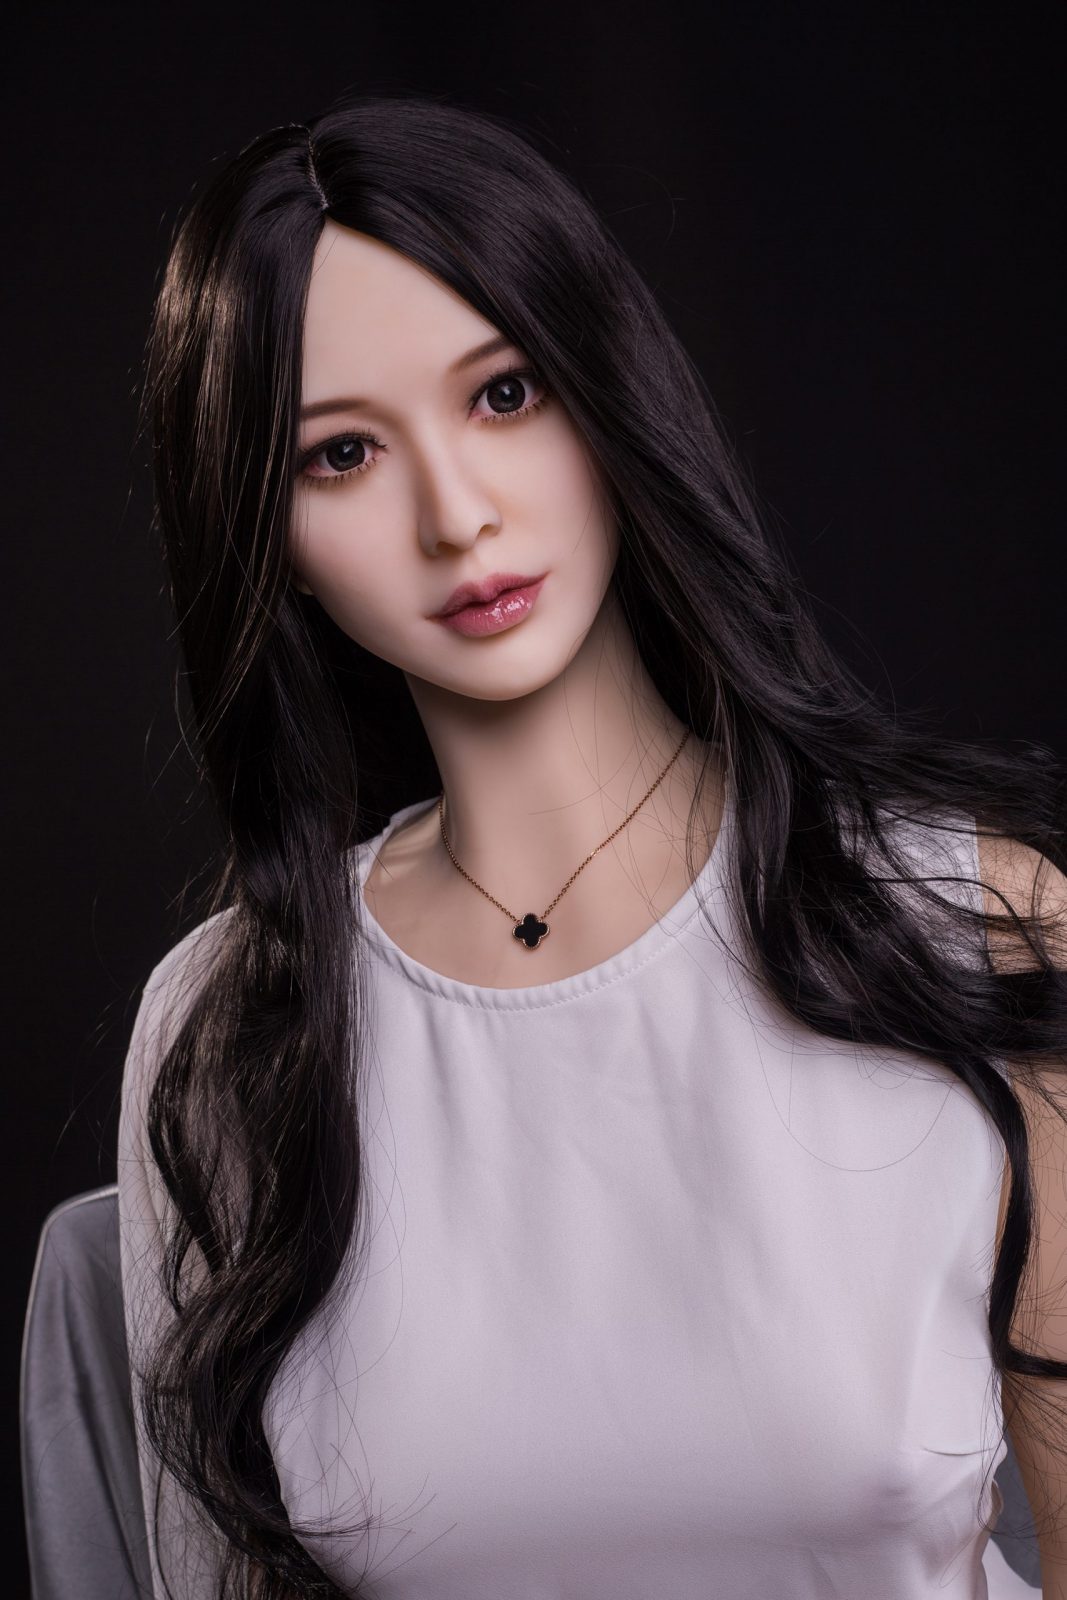 Buy Qita Doll Mumu 170cm Sex Doll Now At Cloud Climax We Offer Low Prices And Fast Discreet